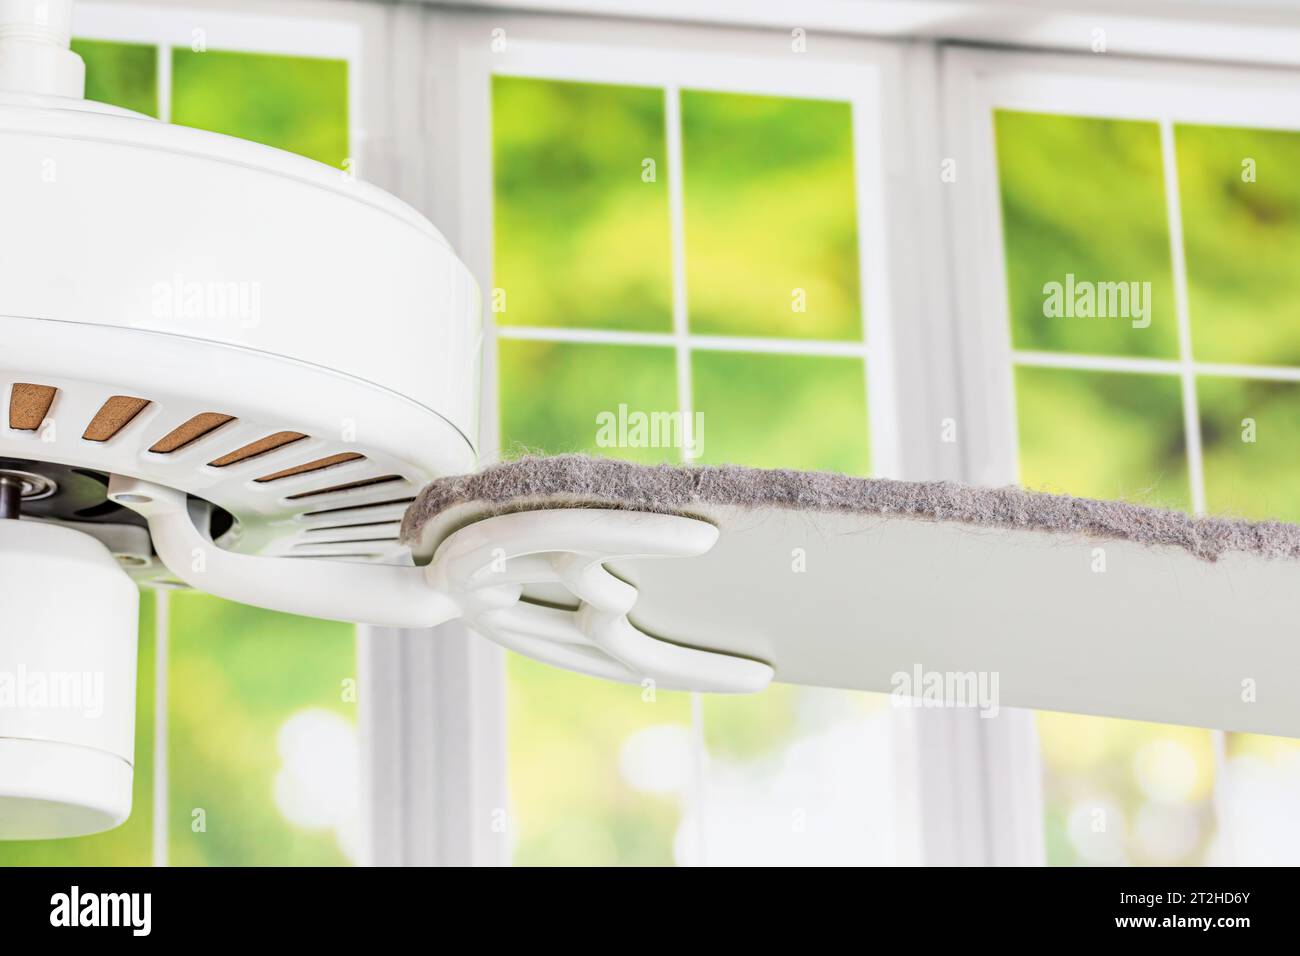 Dirty ceiling fan blade. Housekeeping, indoor allergies and spring cleaning concept Stock Photo